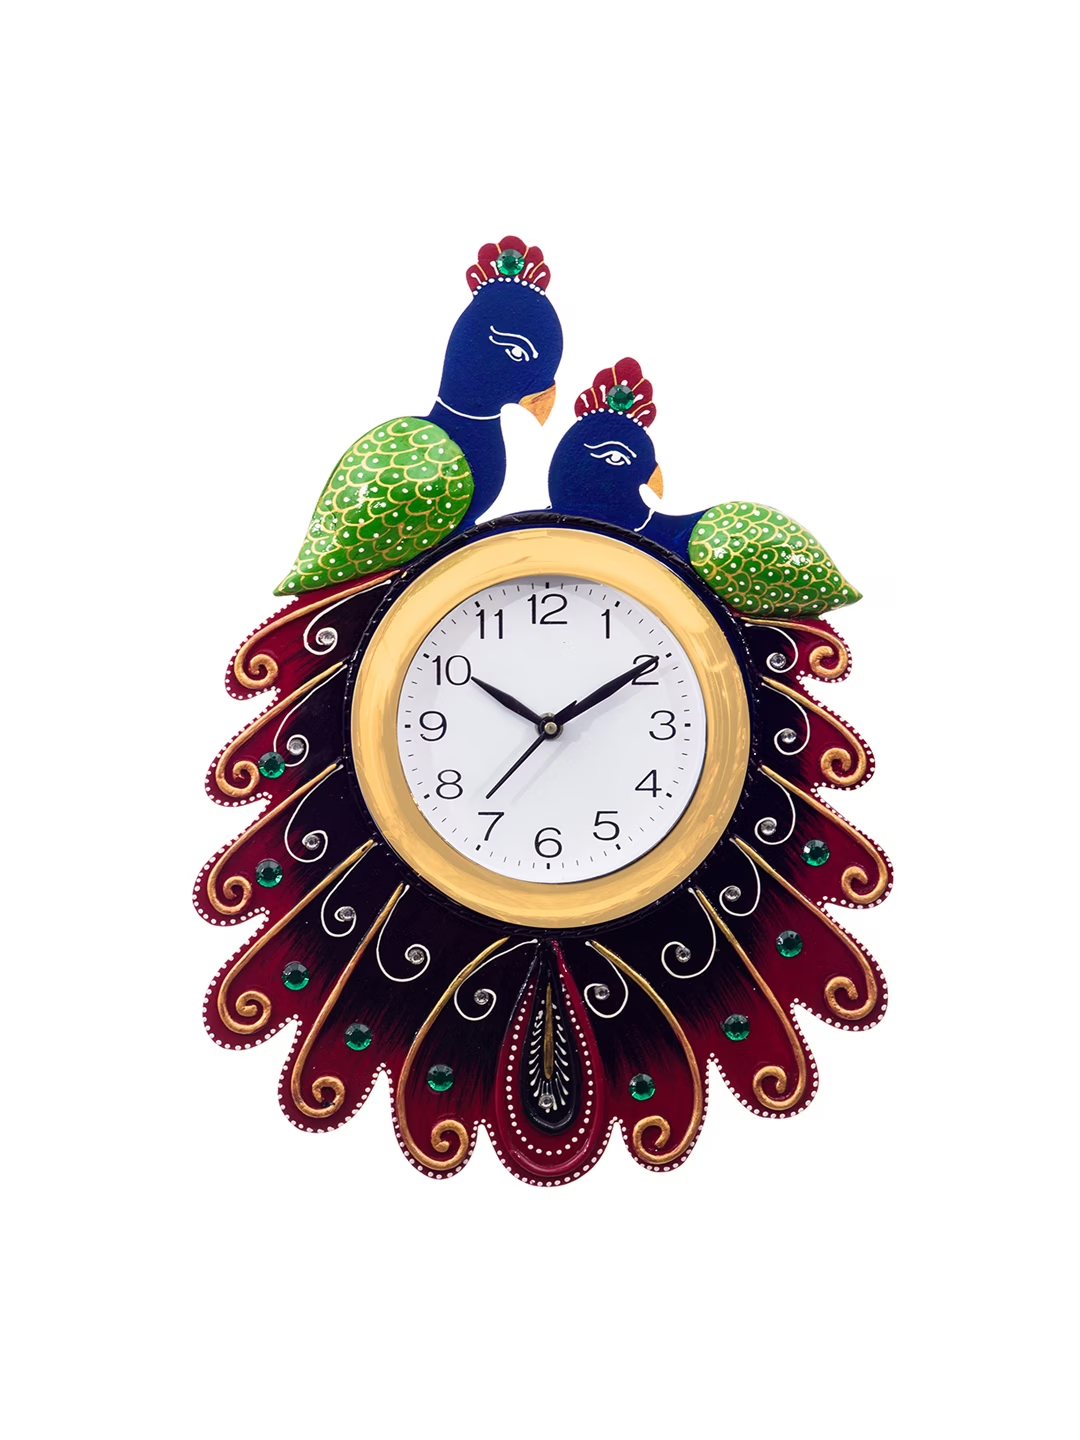 White & Maroon Handcrafted Bird Shaped Printed Analogue Wall Clock